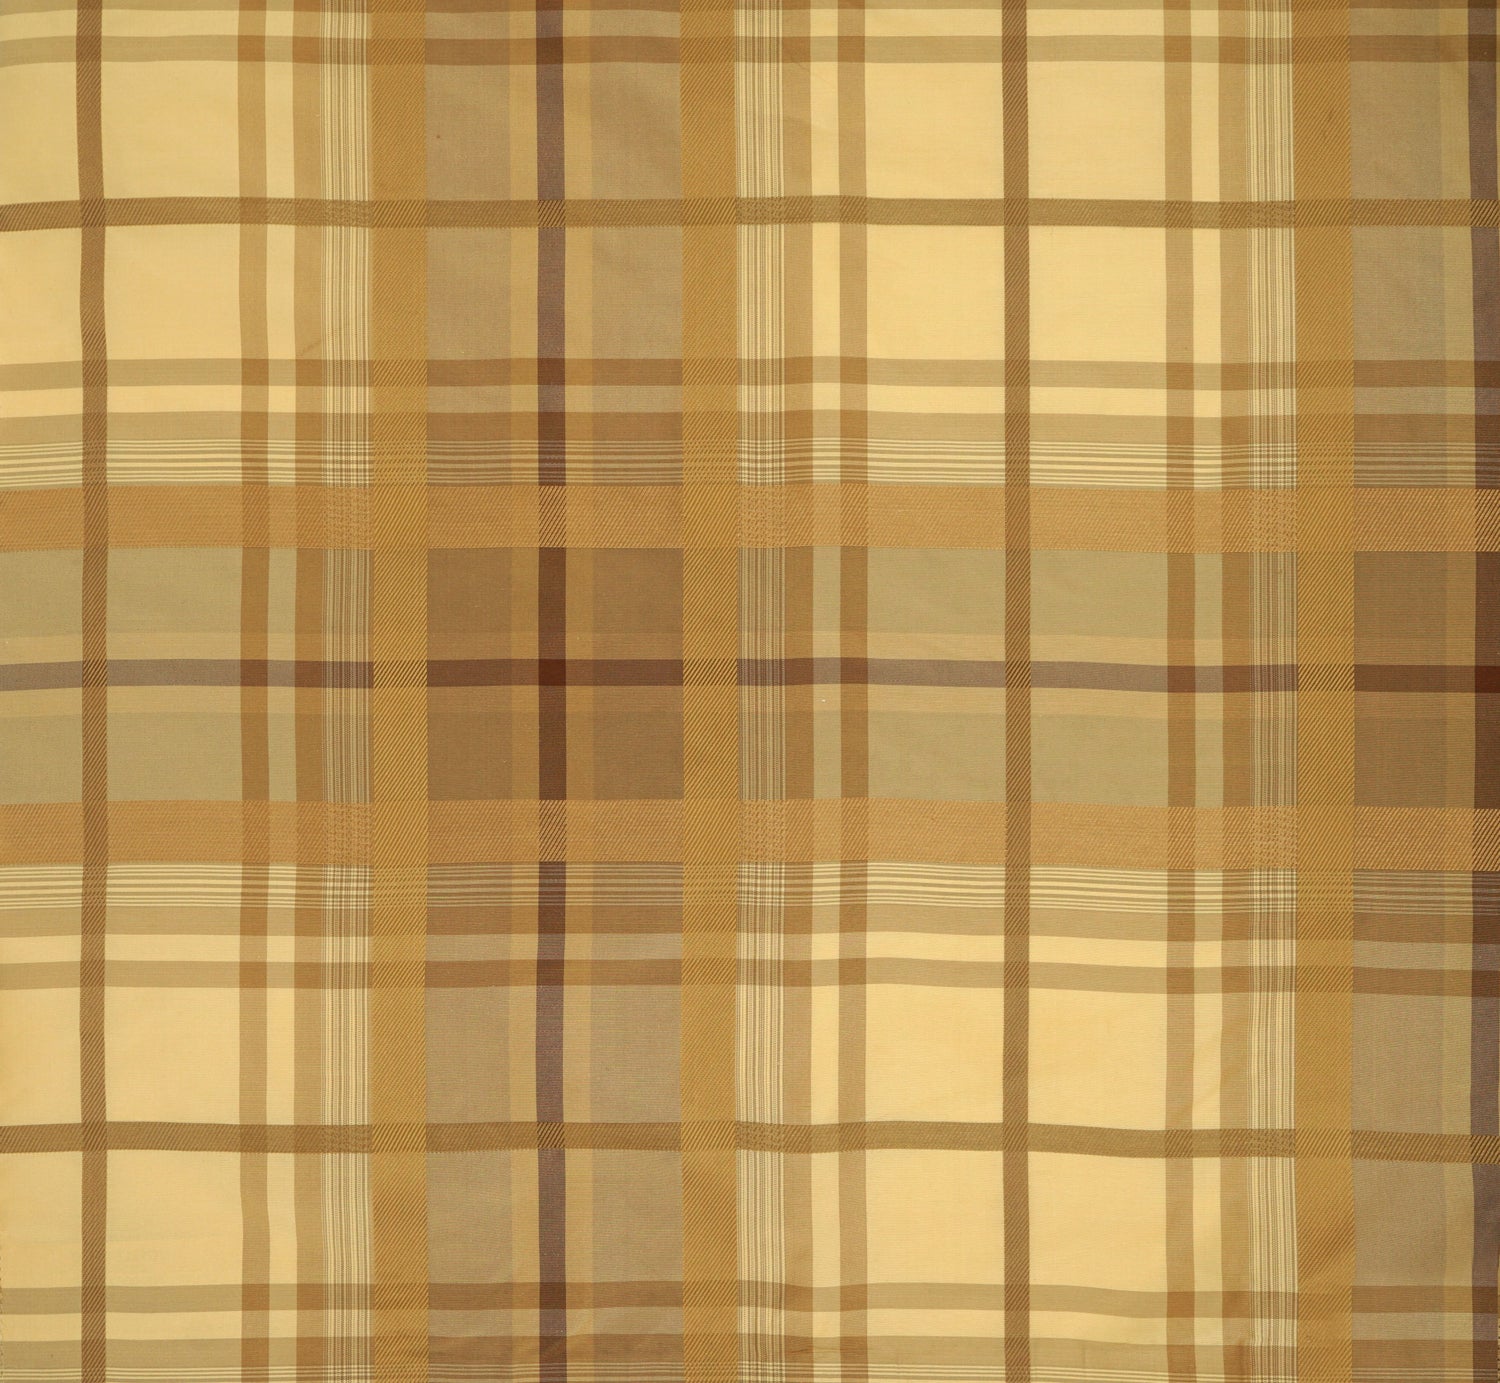 Joelle Plaid fabric in desert mist color - pattern number NG 00020046 - by Scalamandre in the Old World Weavers collection